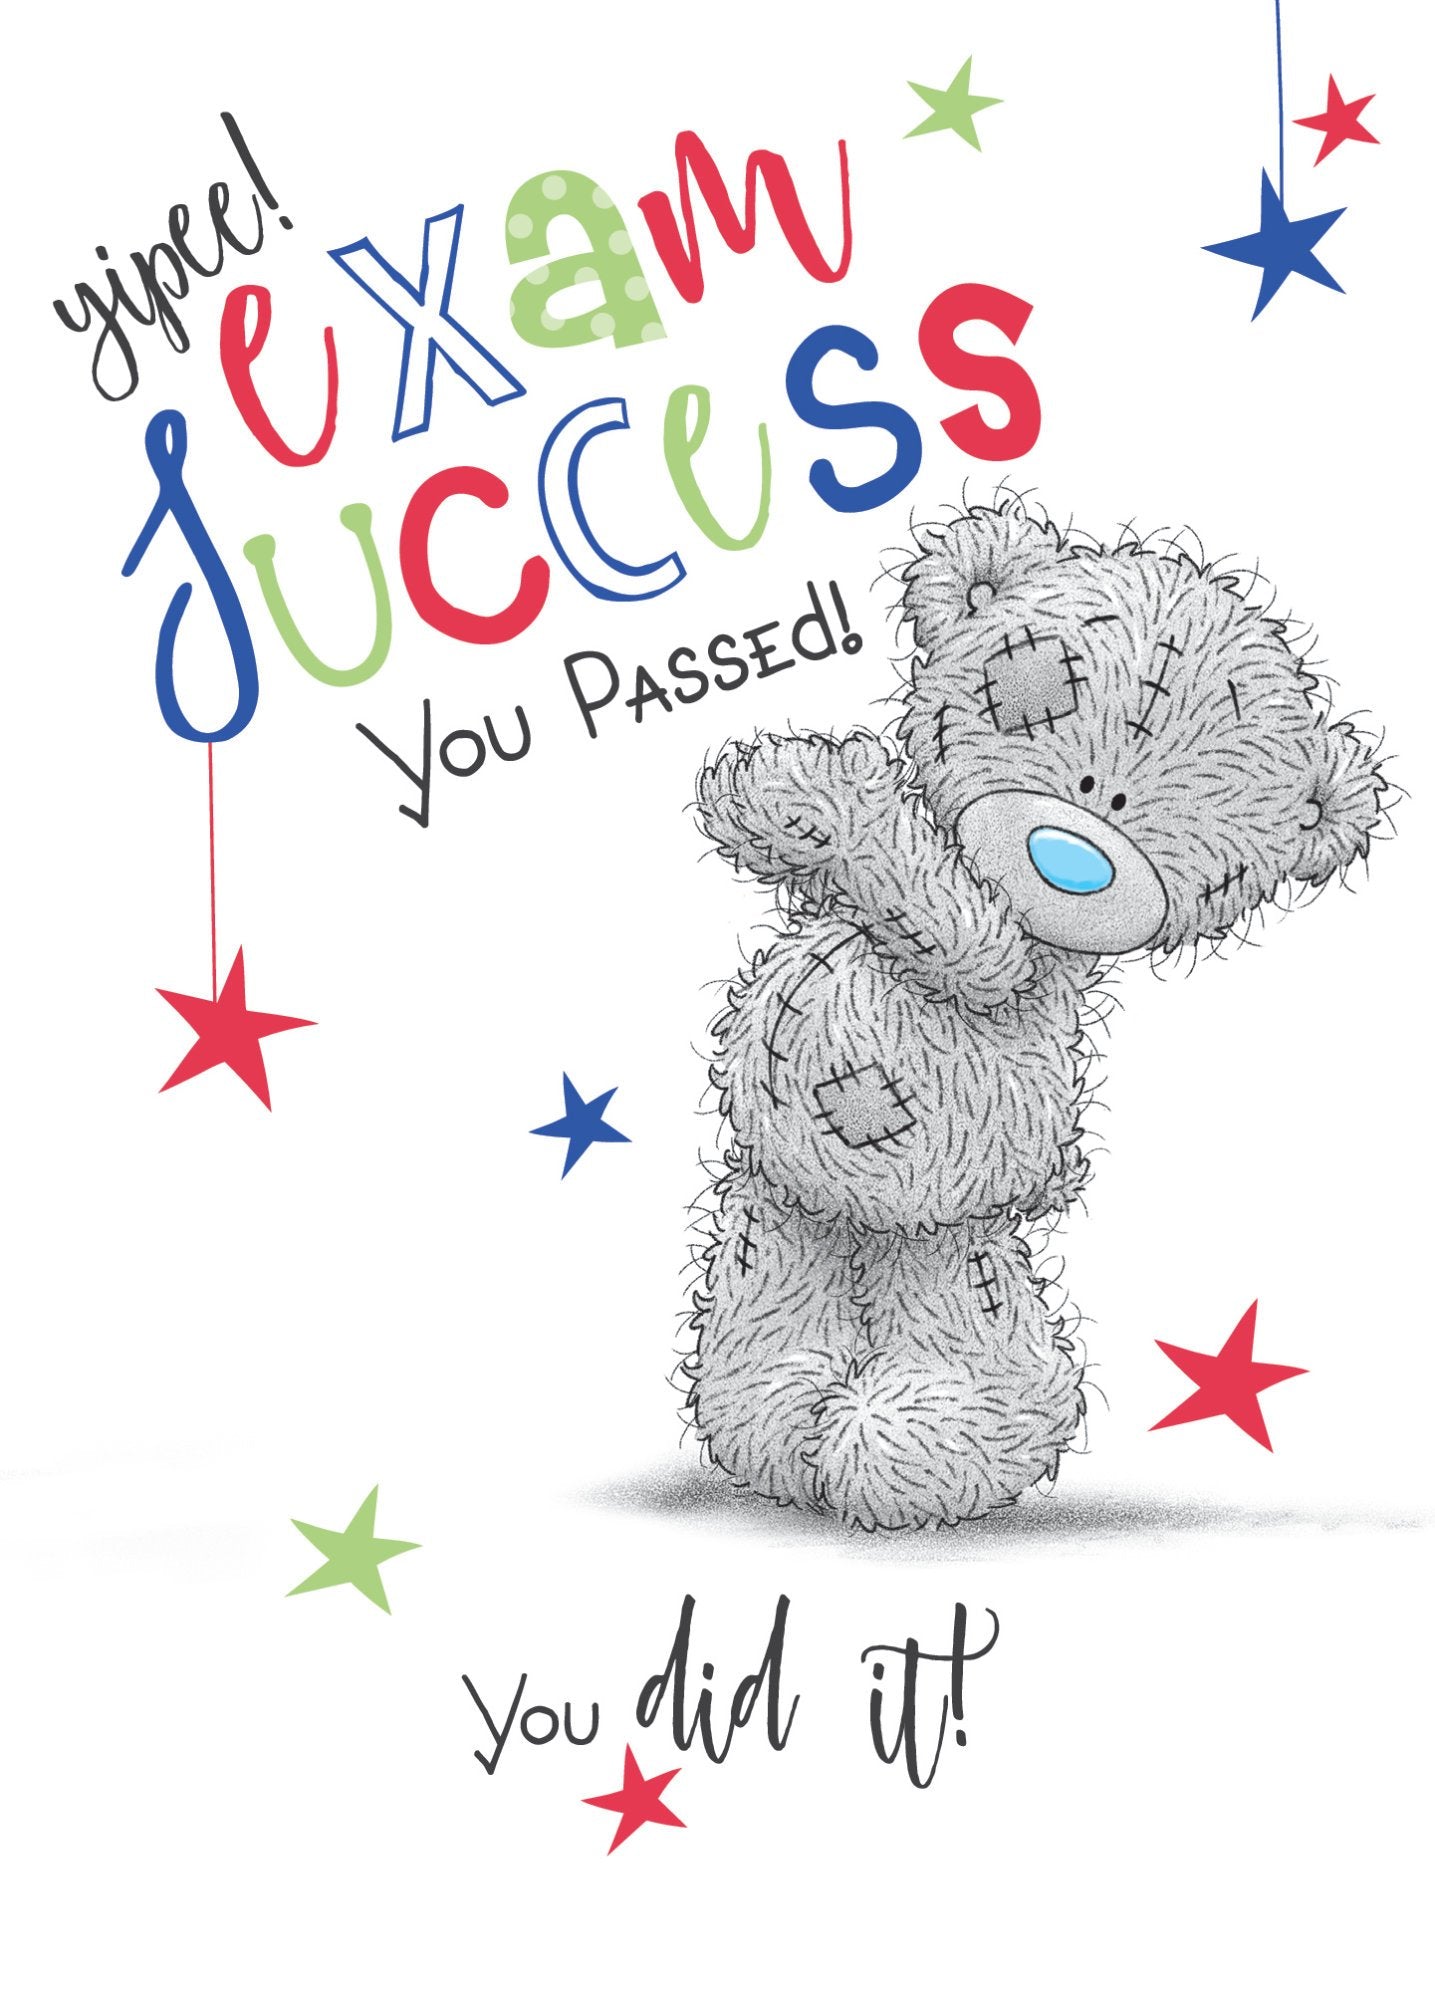 Photograph of Exam Congratulations Teddy Did It Greetings Card at Nicole's Shop